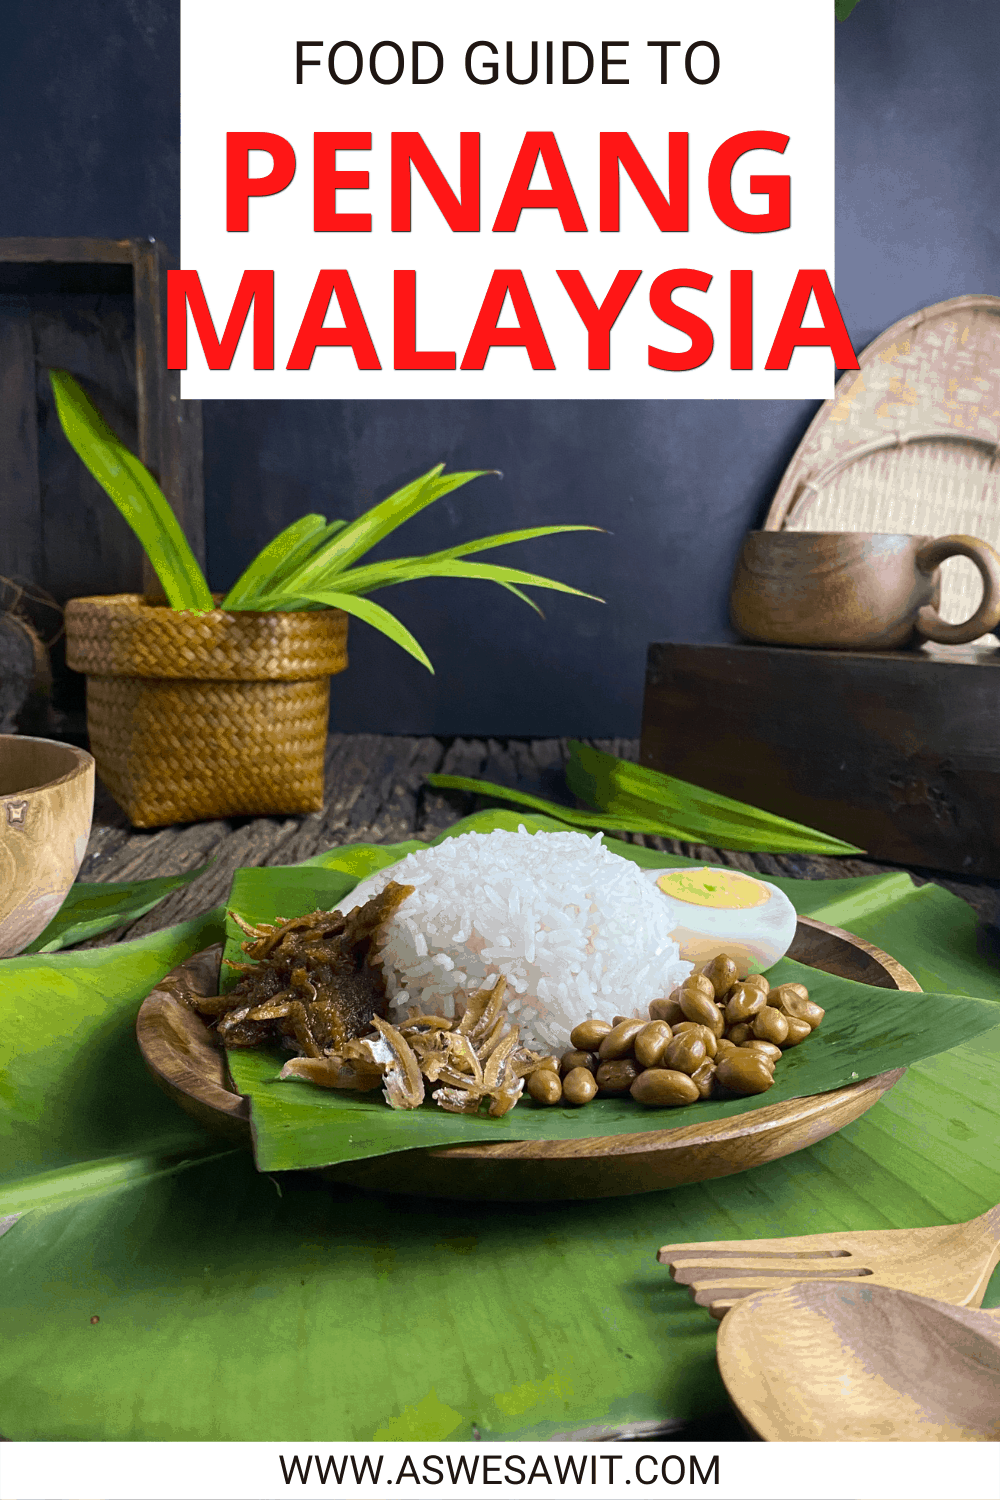 Plate with rice, dried ikan bilis fish, peanuts and half of a hard boiled egg. Text overlay says "Food guide to Penang Malaysia"